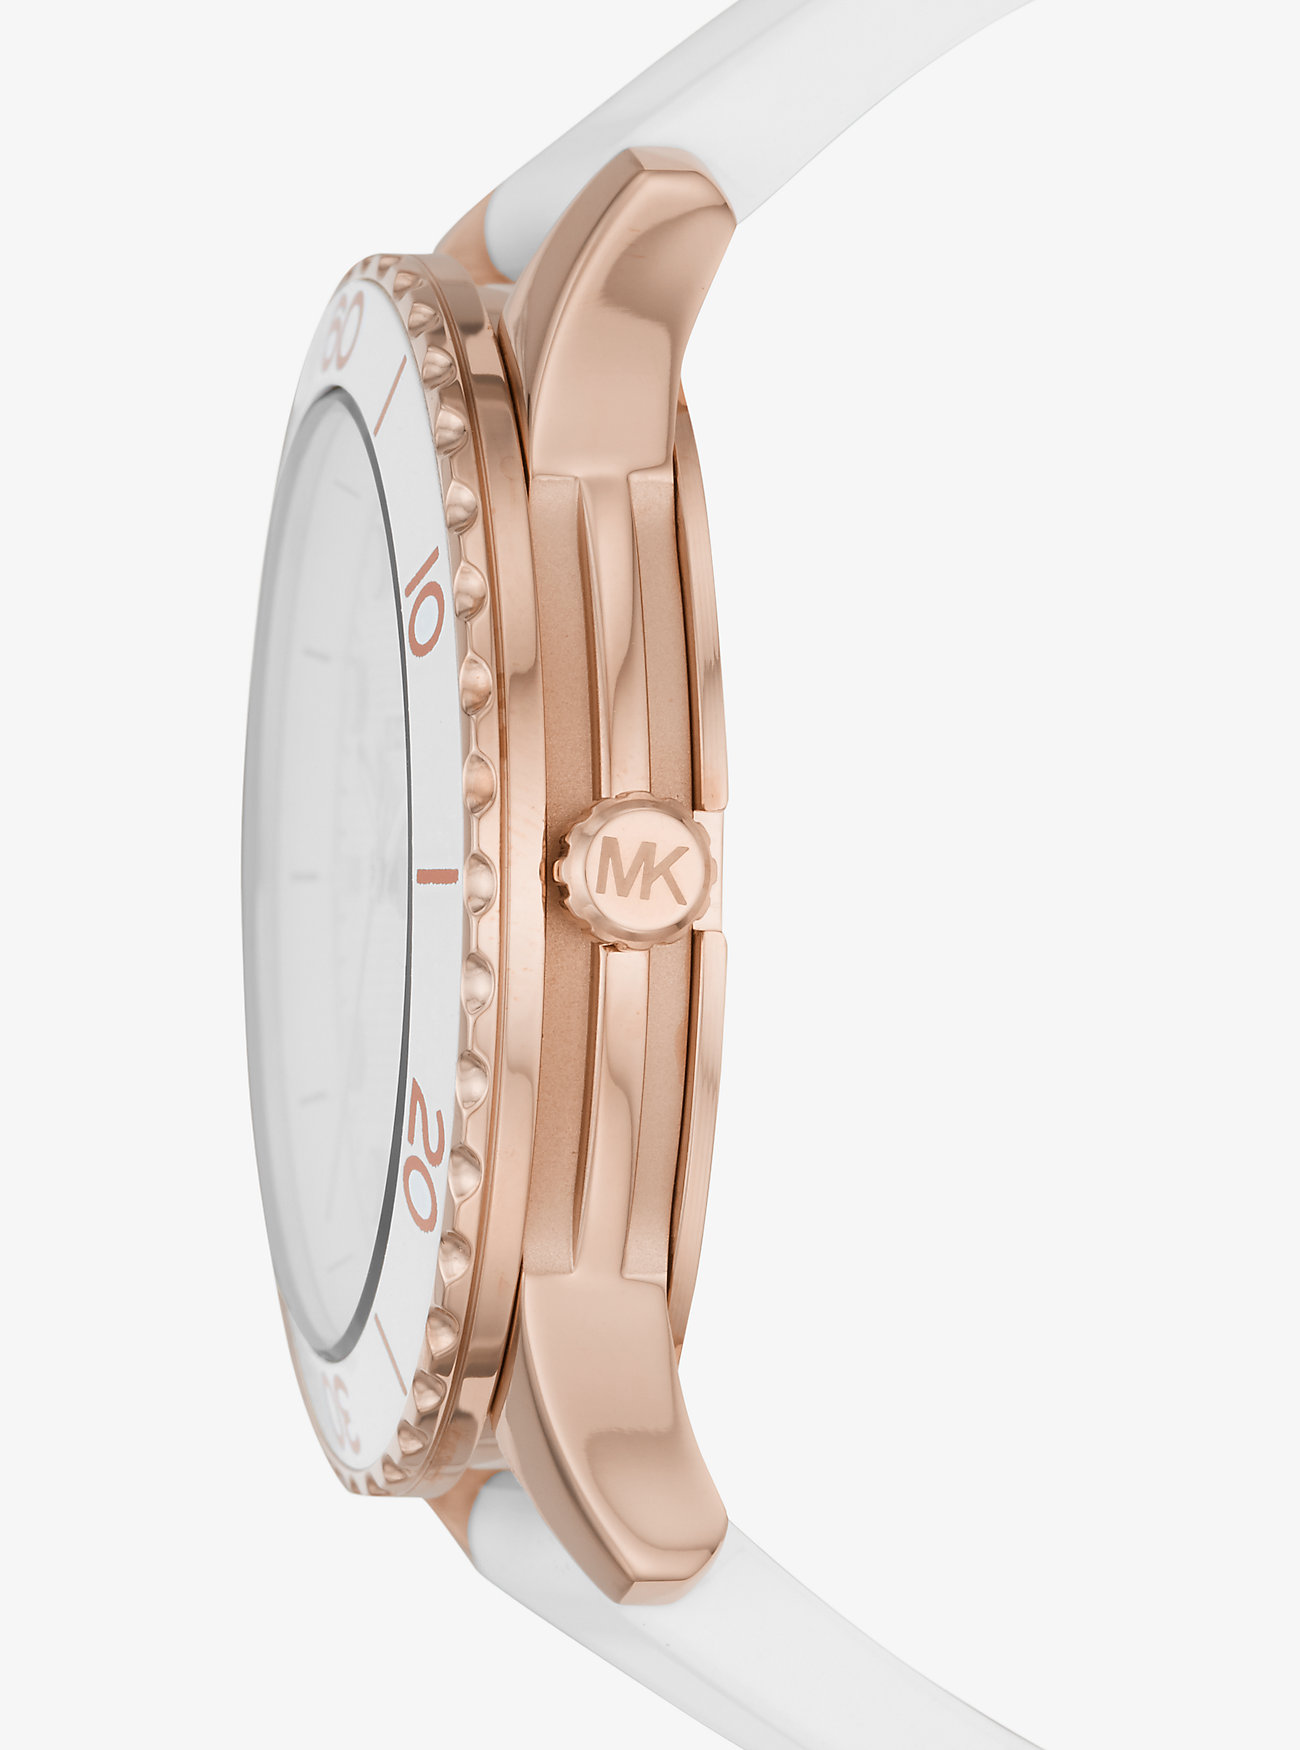 ĐỒNG HỒ MICHAEL KORS RUNWAY DIVE OVERSIZED ROSE GOLD-TONE SILICONE STRAP WATCH MK6853 7